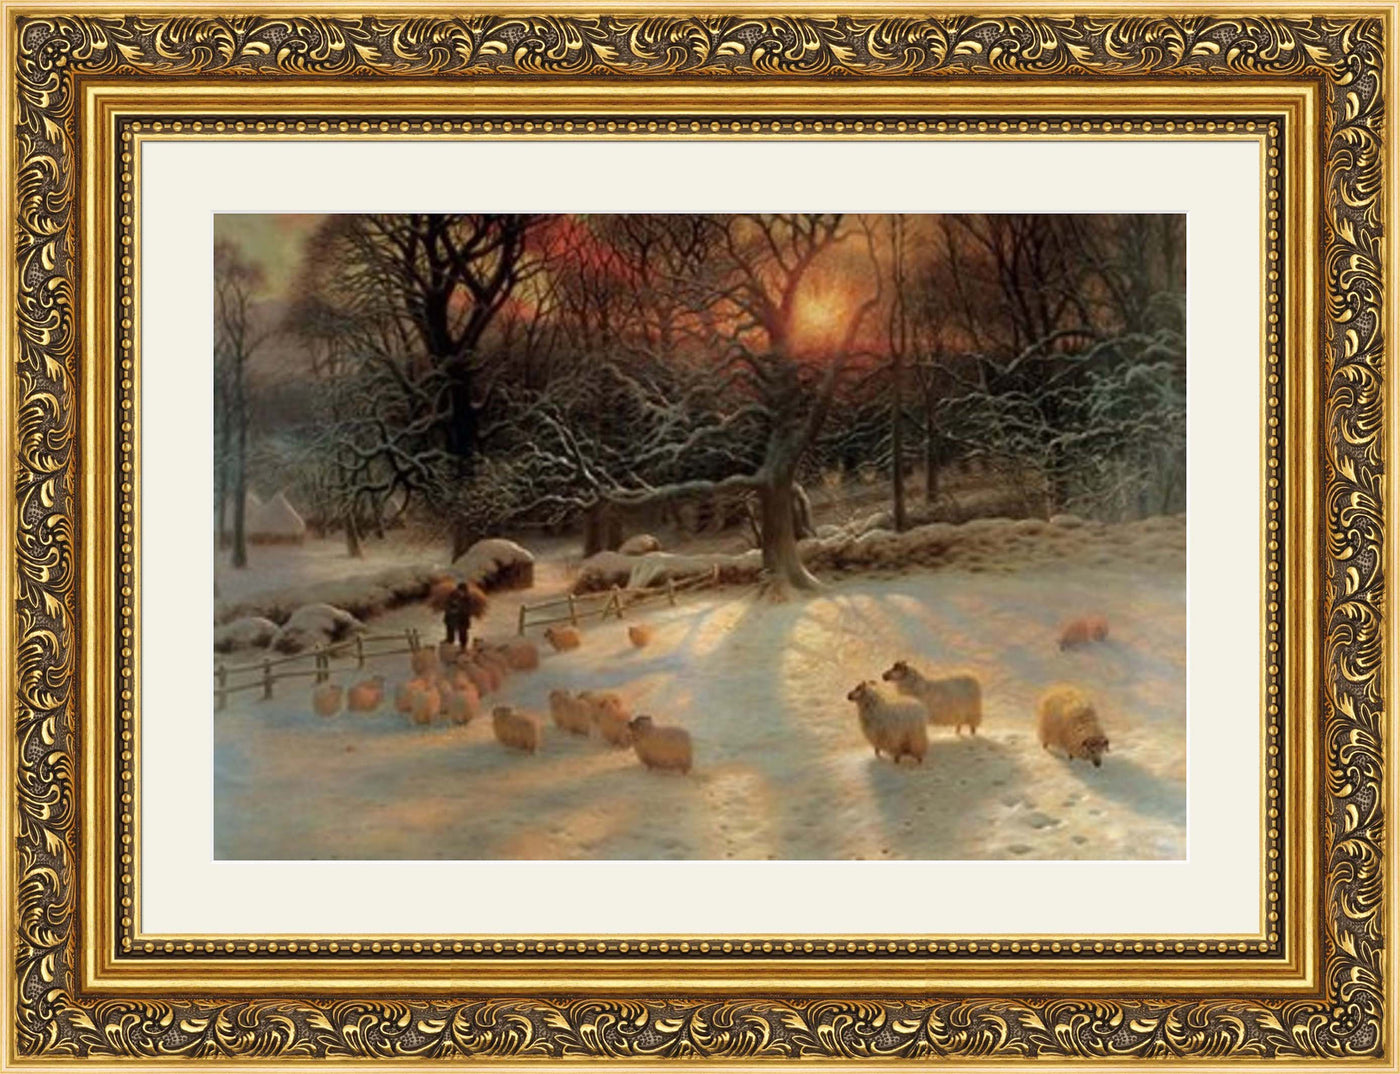 A Shortening Winter's Days By Joseph Farquharson 'Exclusive frame' - TheArtistsQuarter